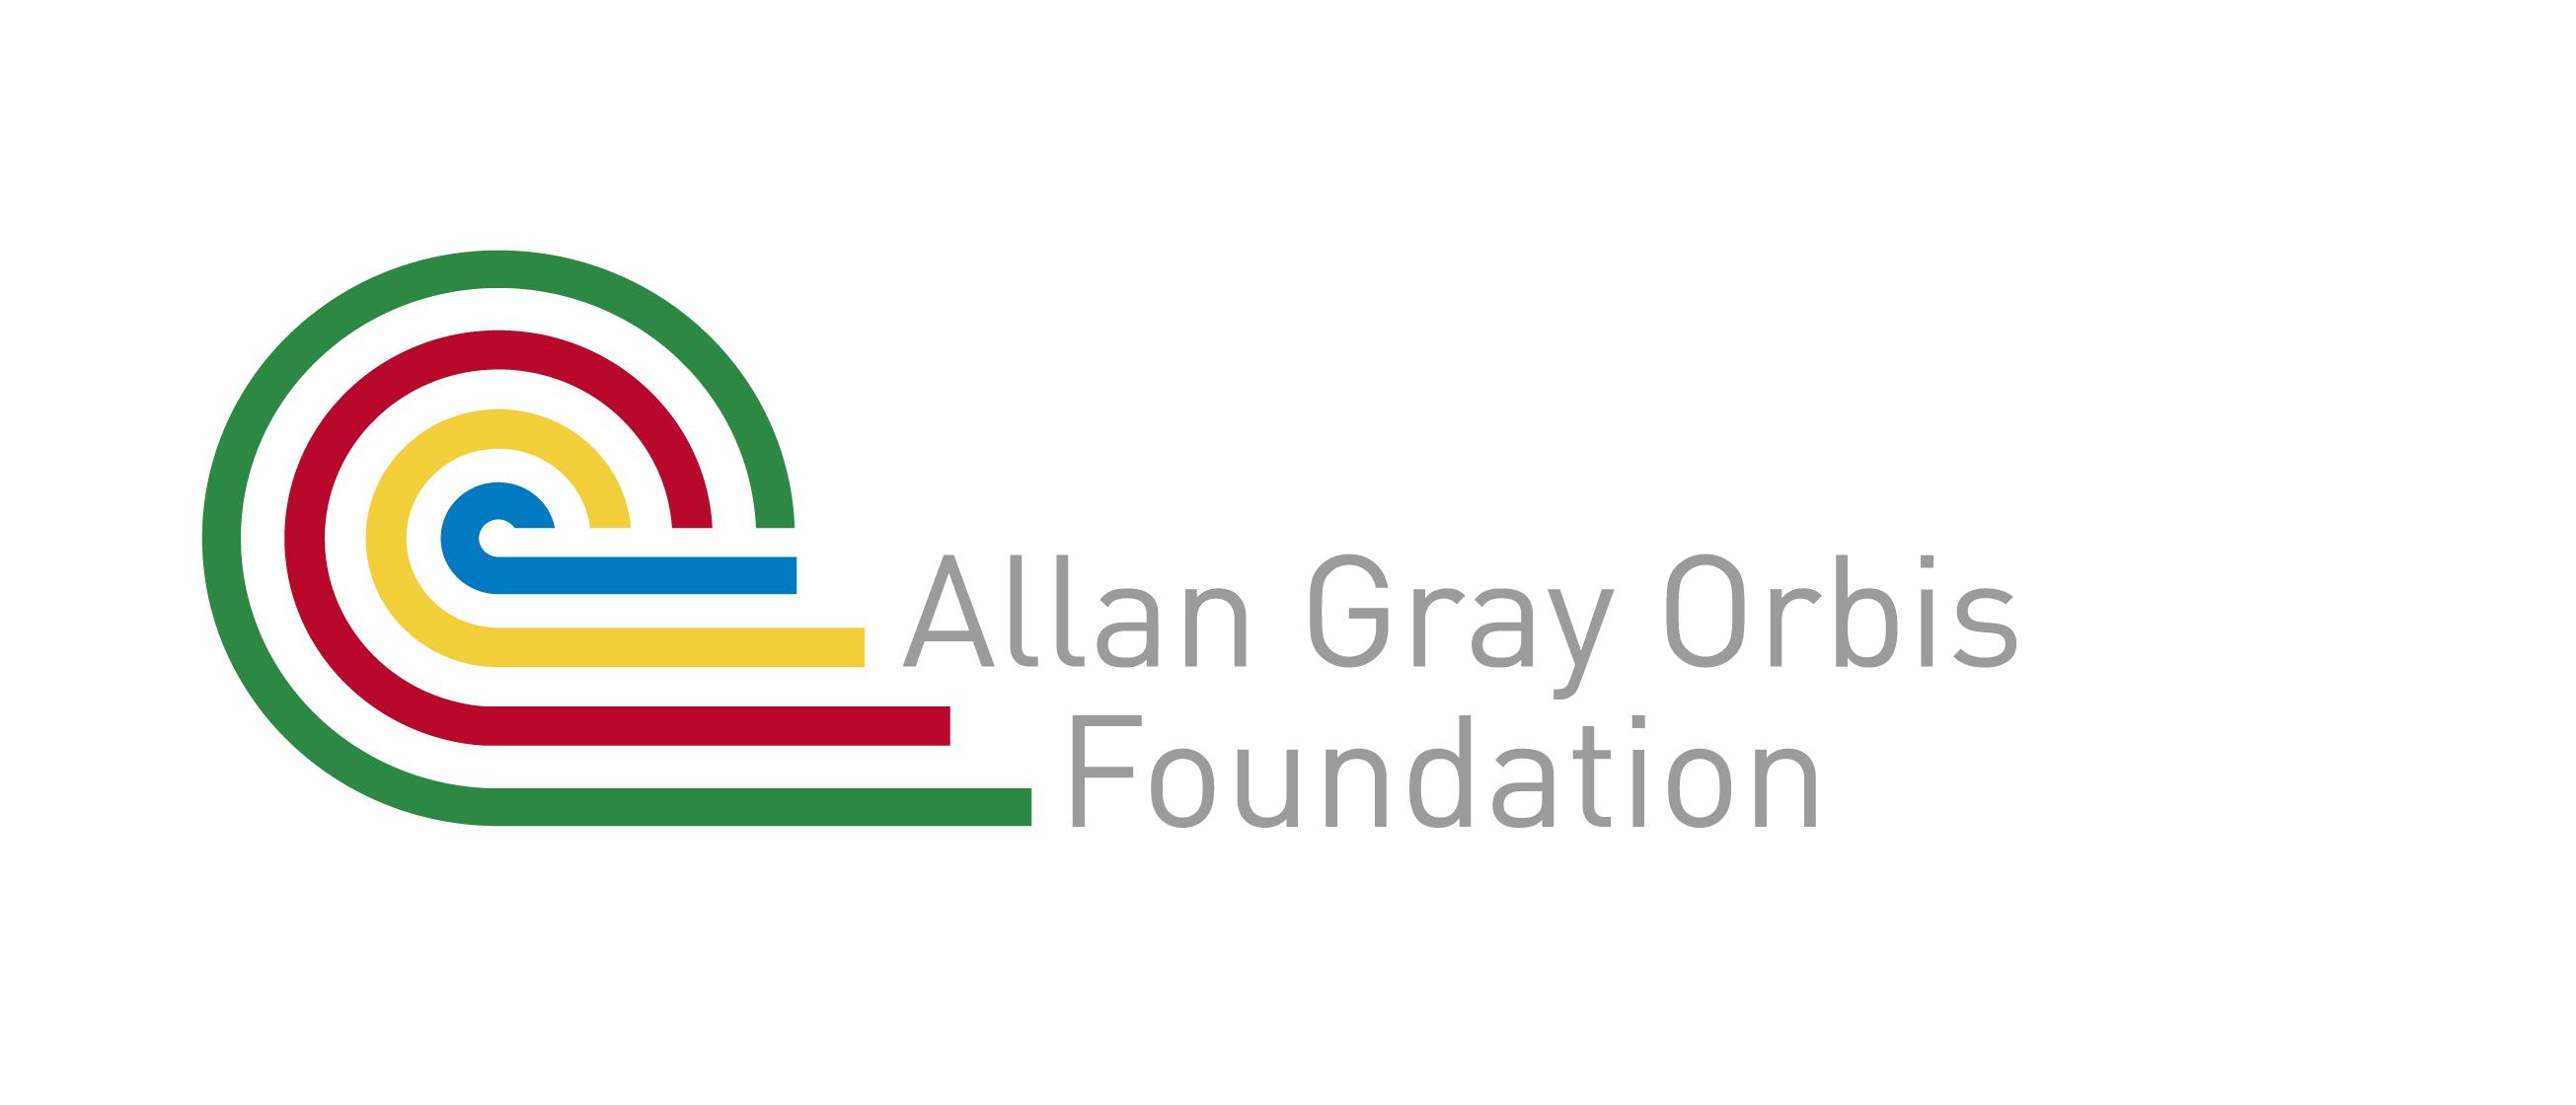 The Allan Gray Orbis Foundation – Fellowship Application Form 2018 for Namibian learners currently in Grade 12